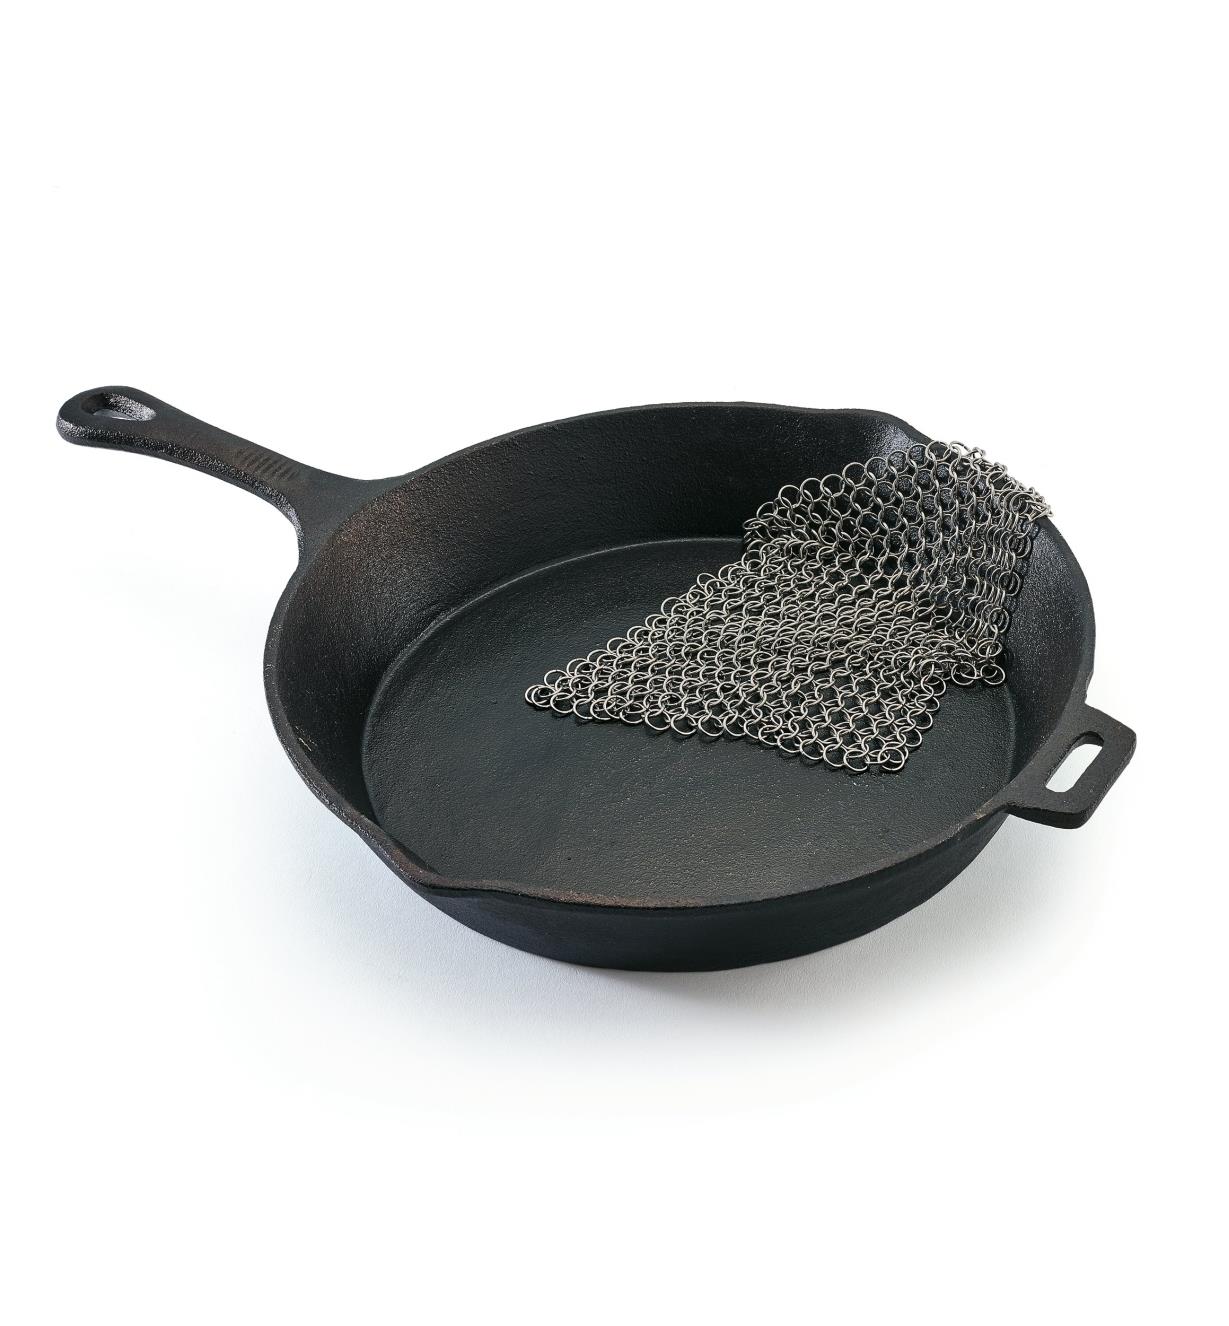 https://assets.leevalley.com/Size4/10064/DB309-stainless-steel-chain-mail-scrubber-a-02-r.jpg